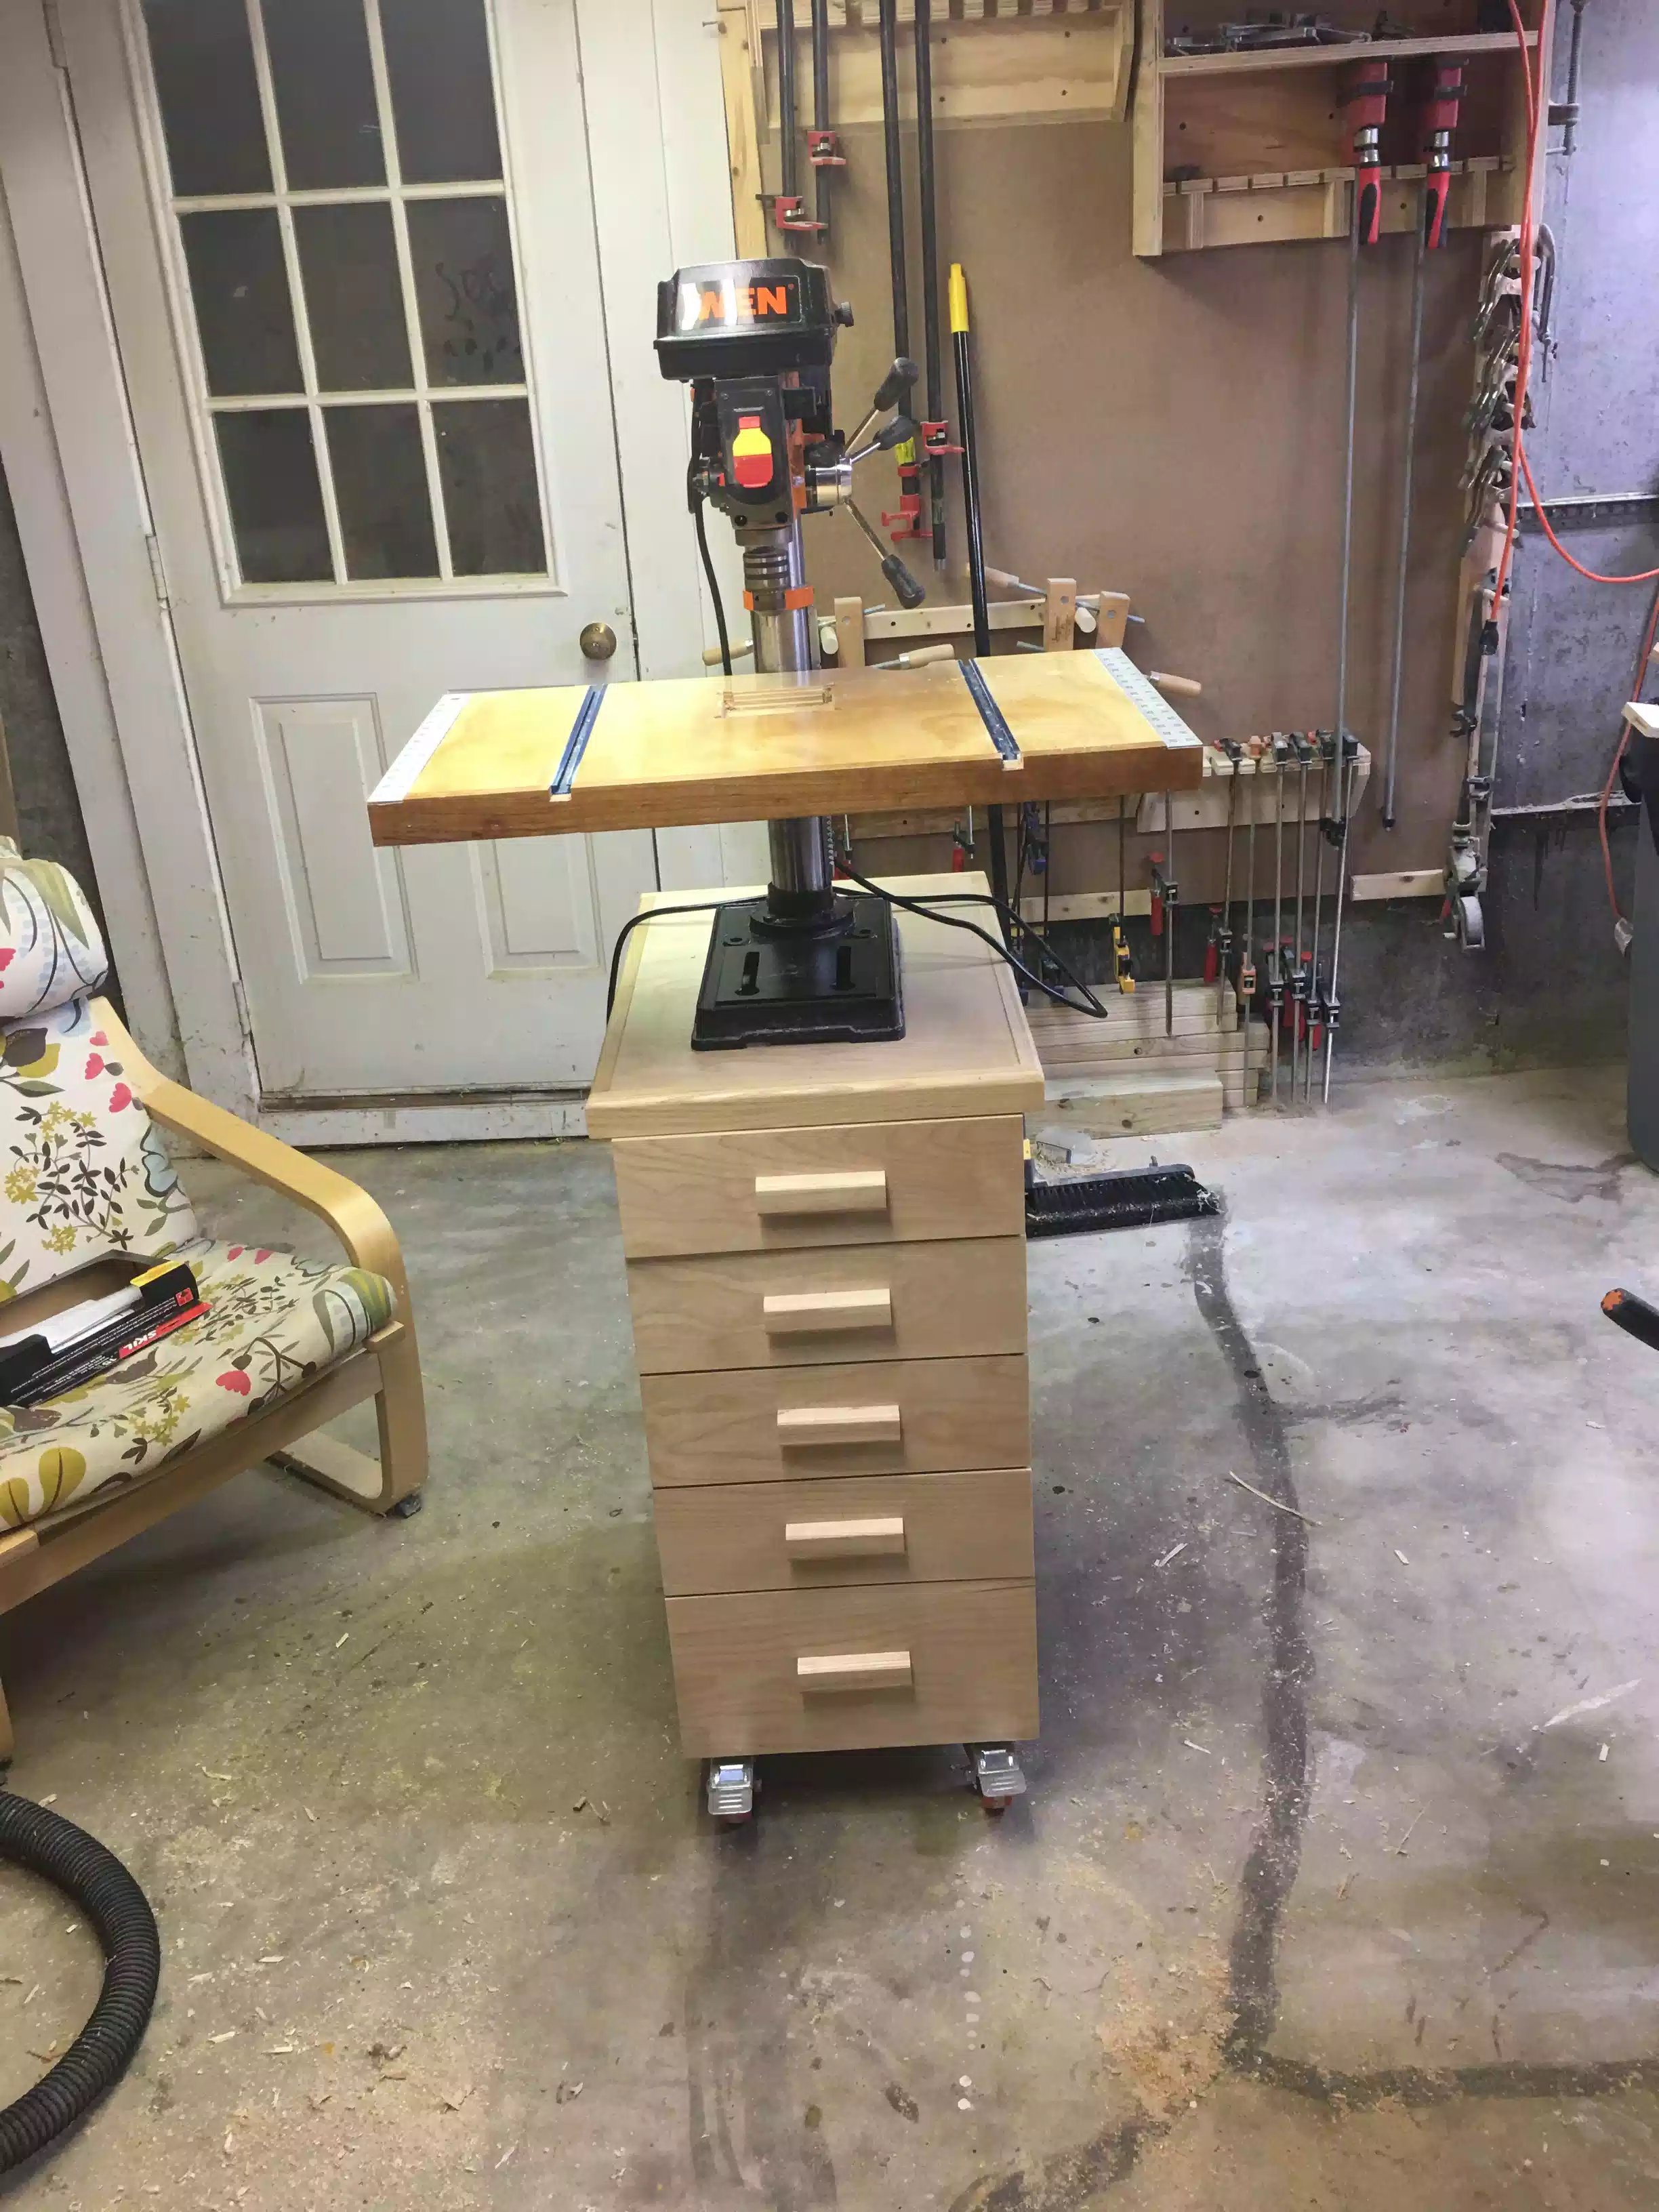 Completed drill press cart